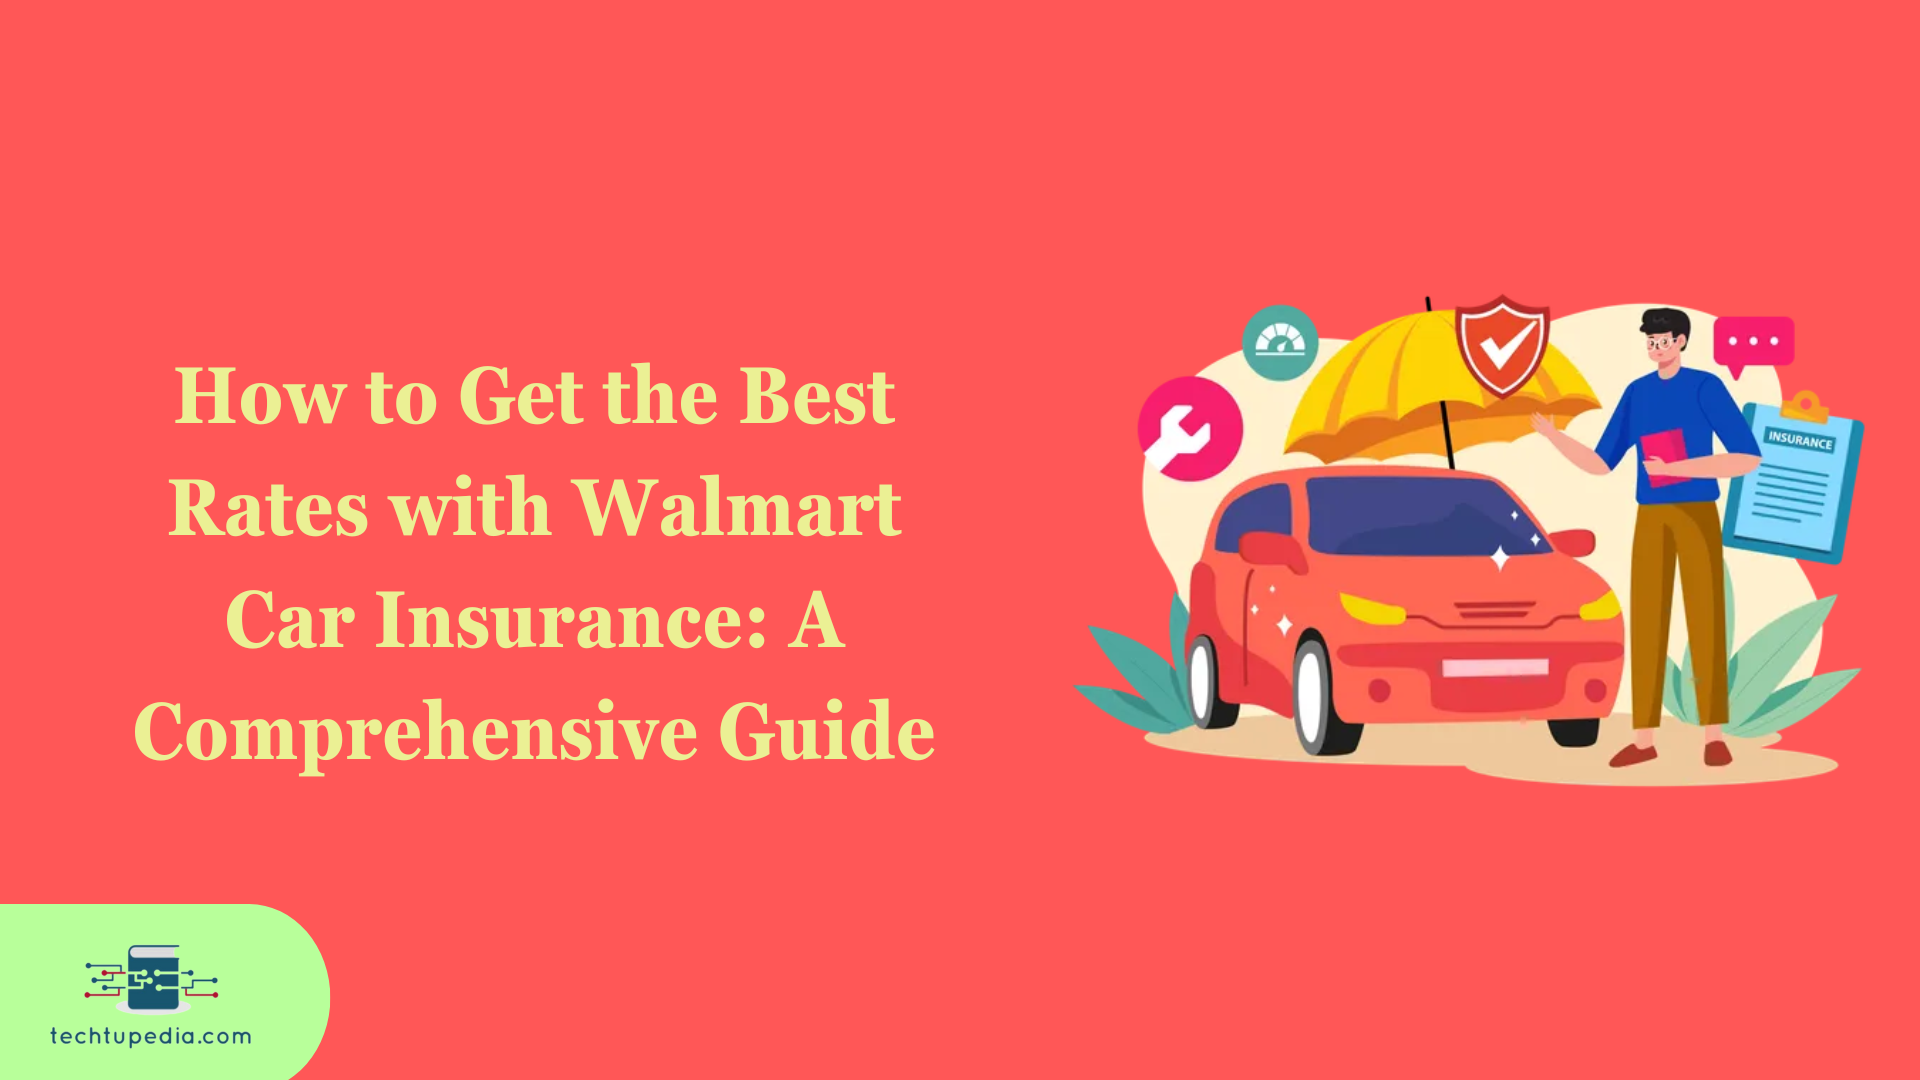 How to Get the Best Rates with Walmart Car Insurance: A Comprehensive Guide